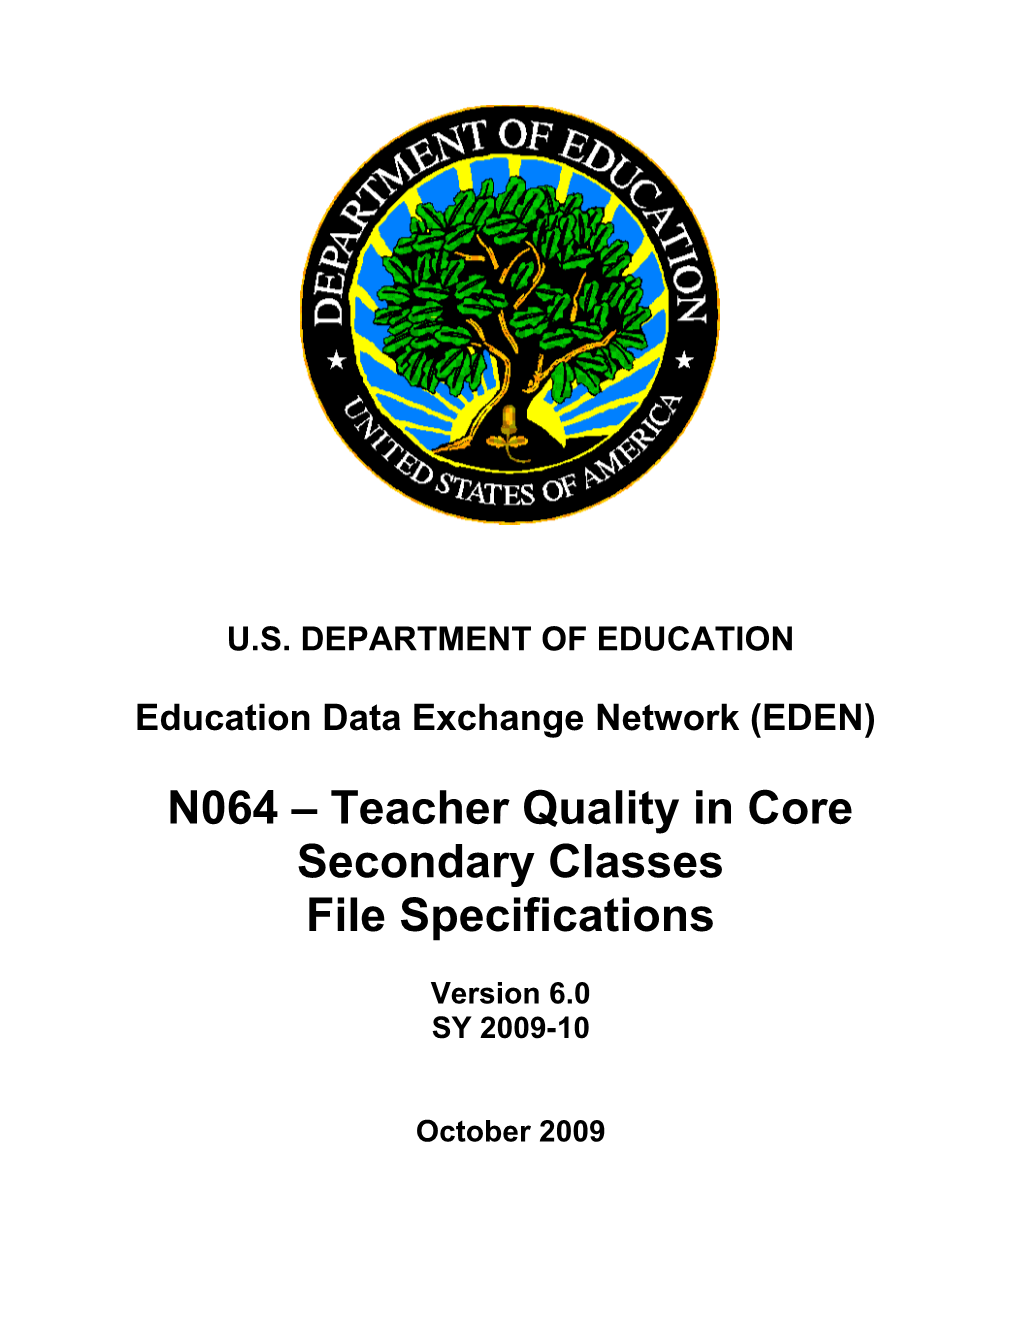 Teacher Quality in Core Secondary Classes File Specifications